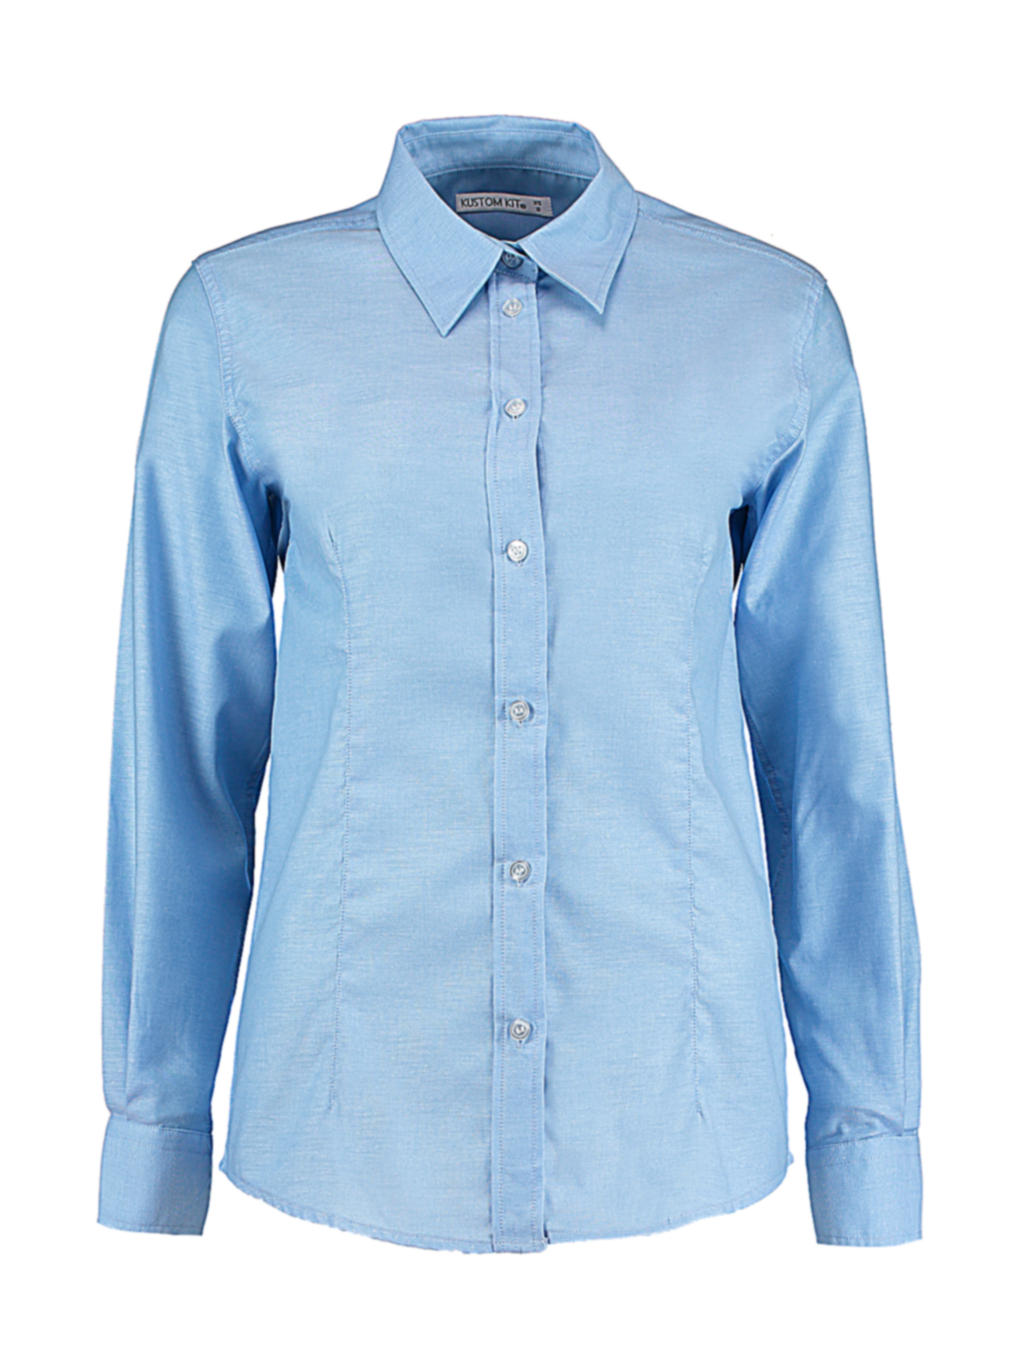  Womens Tailored Fit Workwear Oxford Shirt in Farbe Light Blue